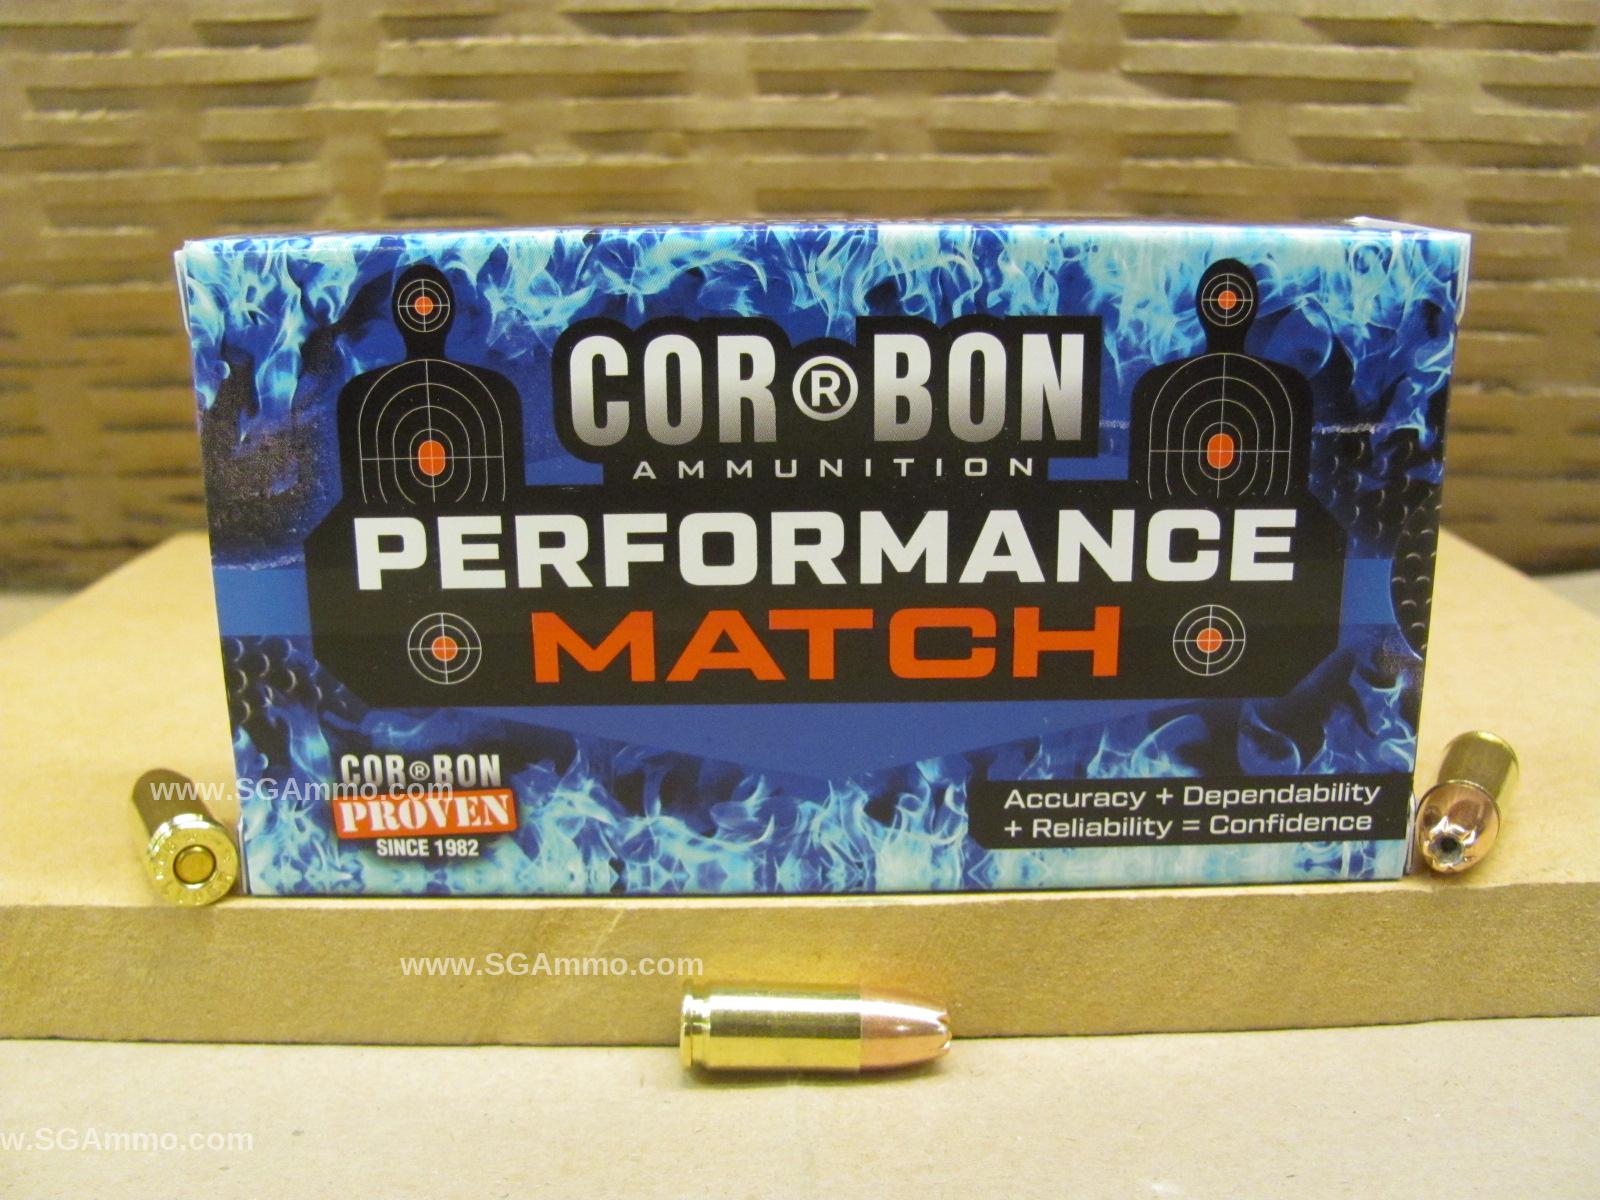 50 Round Box - 9mm Luger 147 Grain Jacketed Hollow Point Subsonic Corbon Performance Match Ammo - PM09S14750